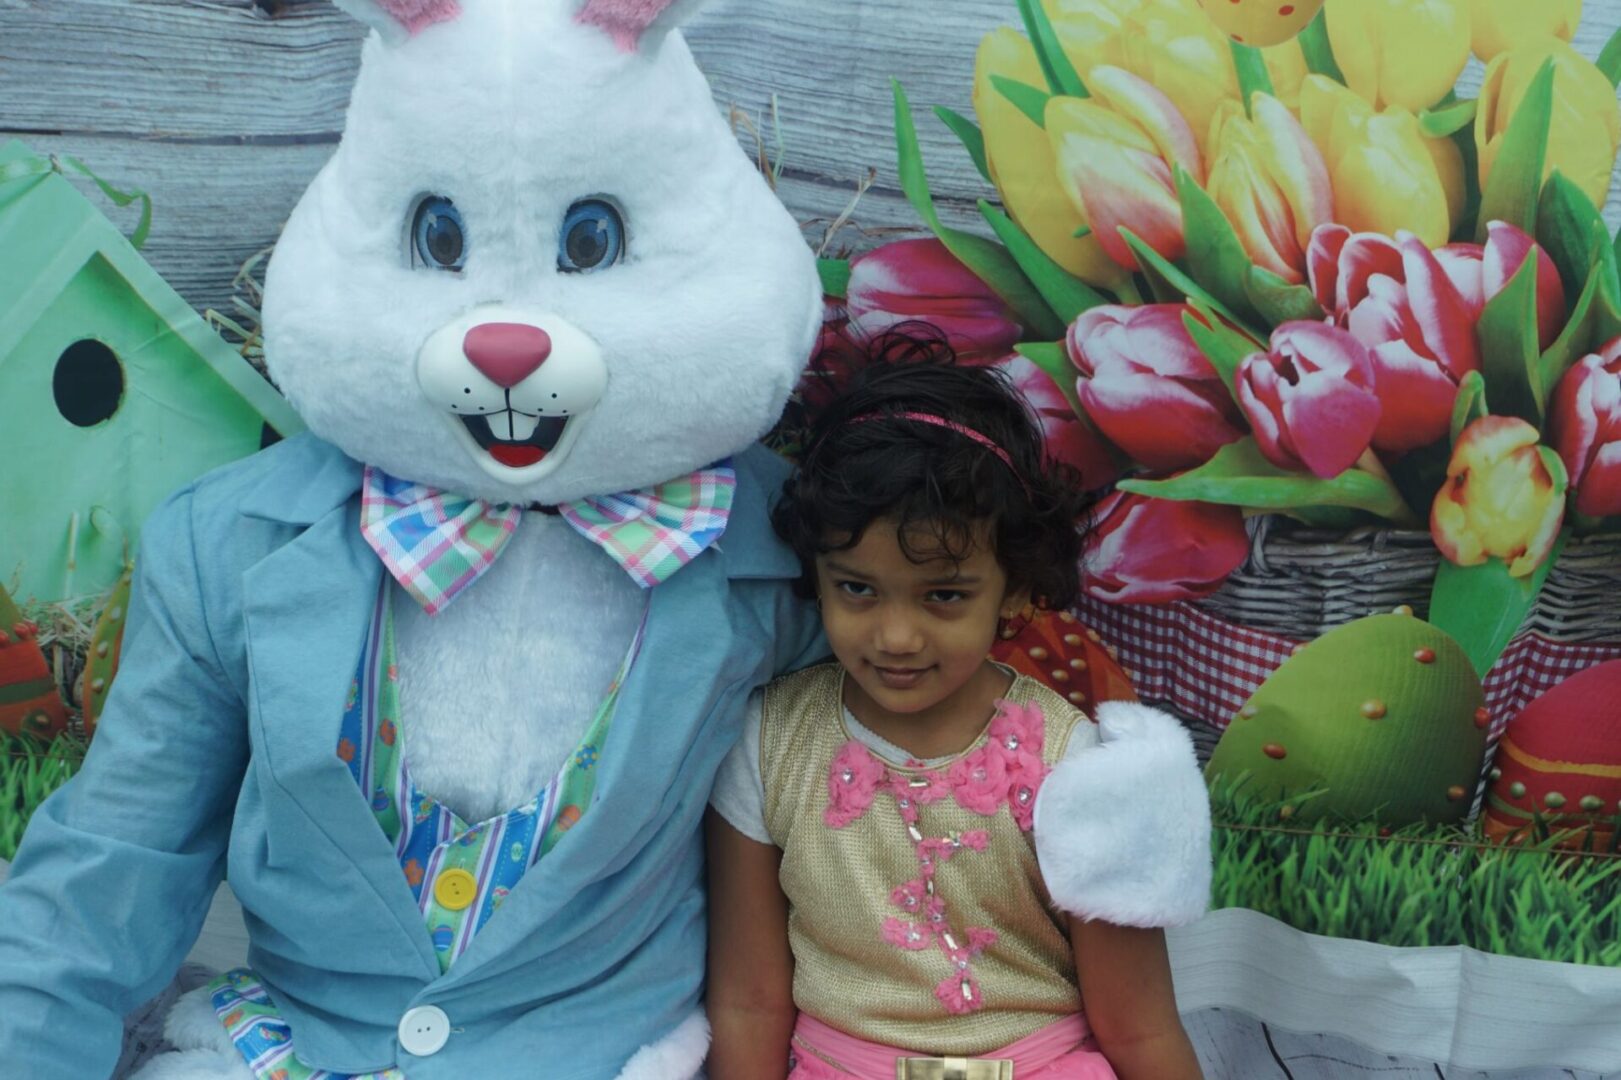 The bunny mascot together with a girl in a yellow and pink dress (1)